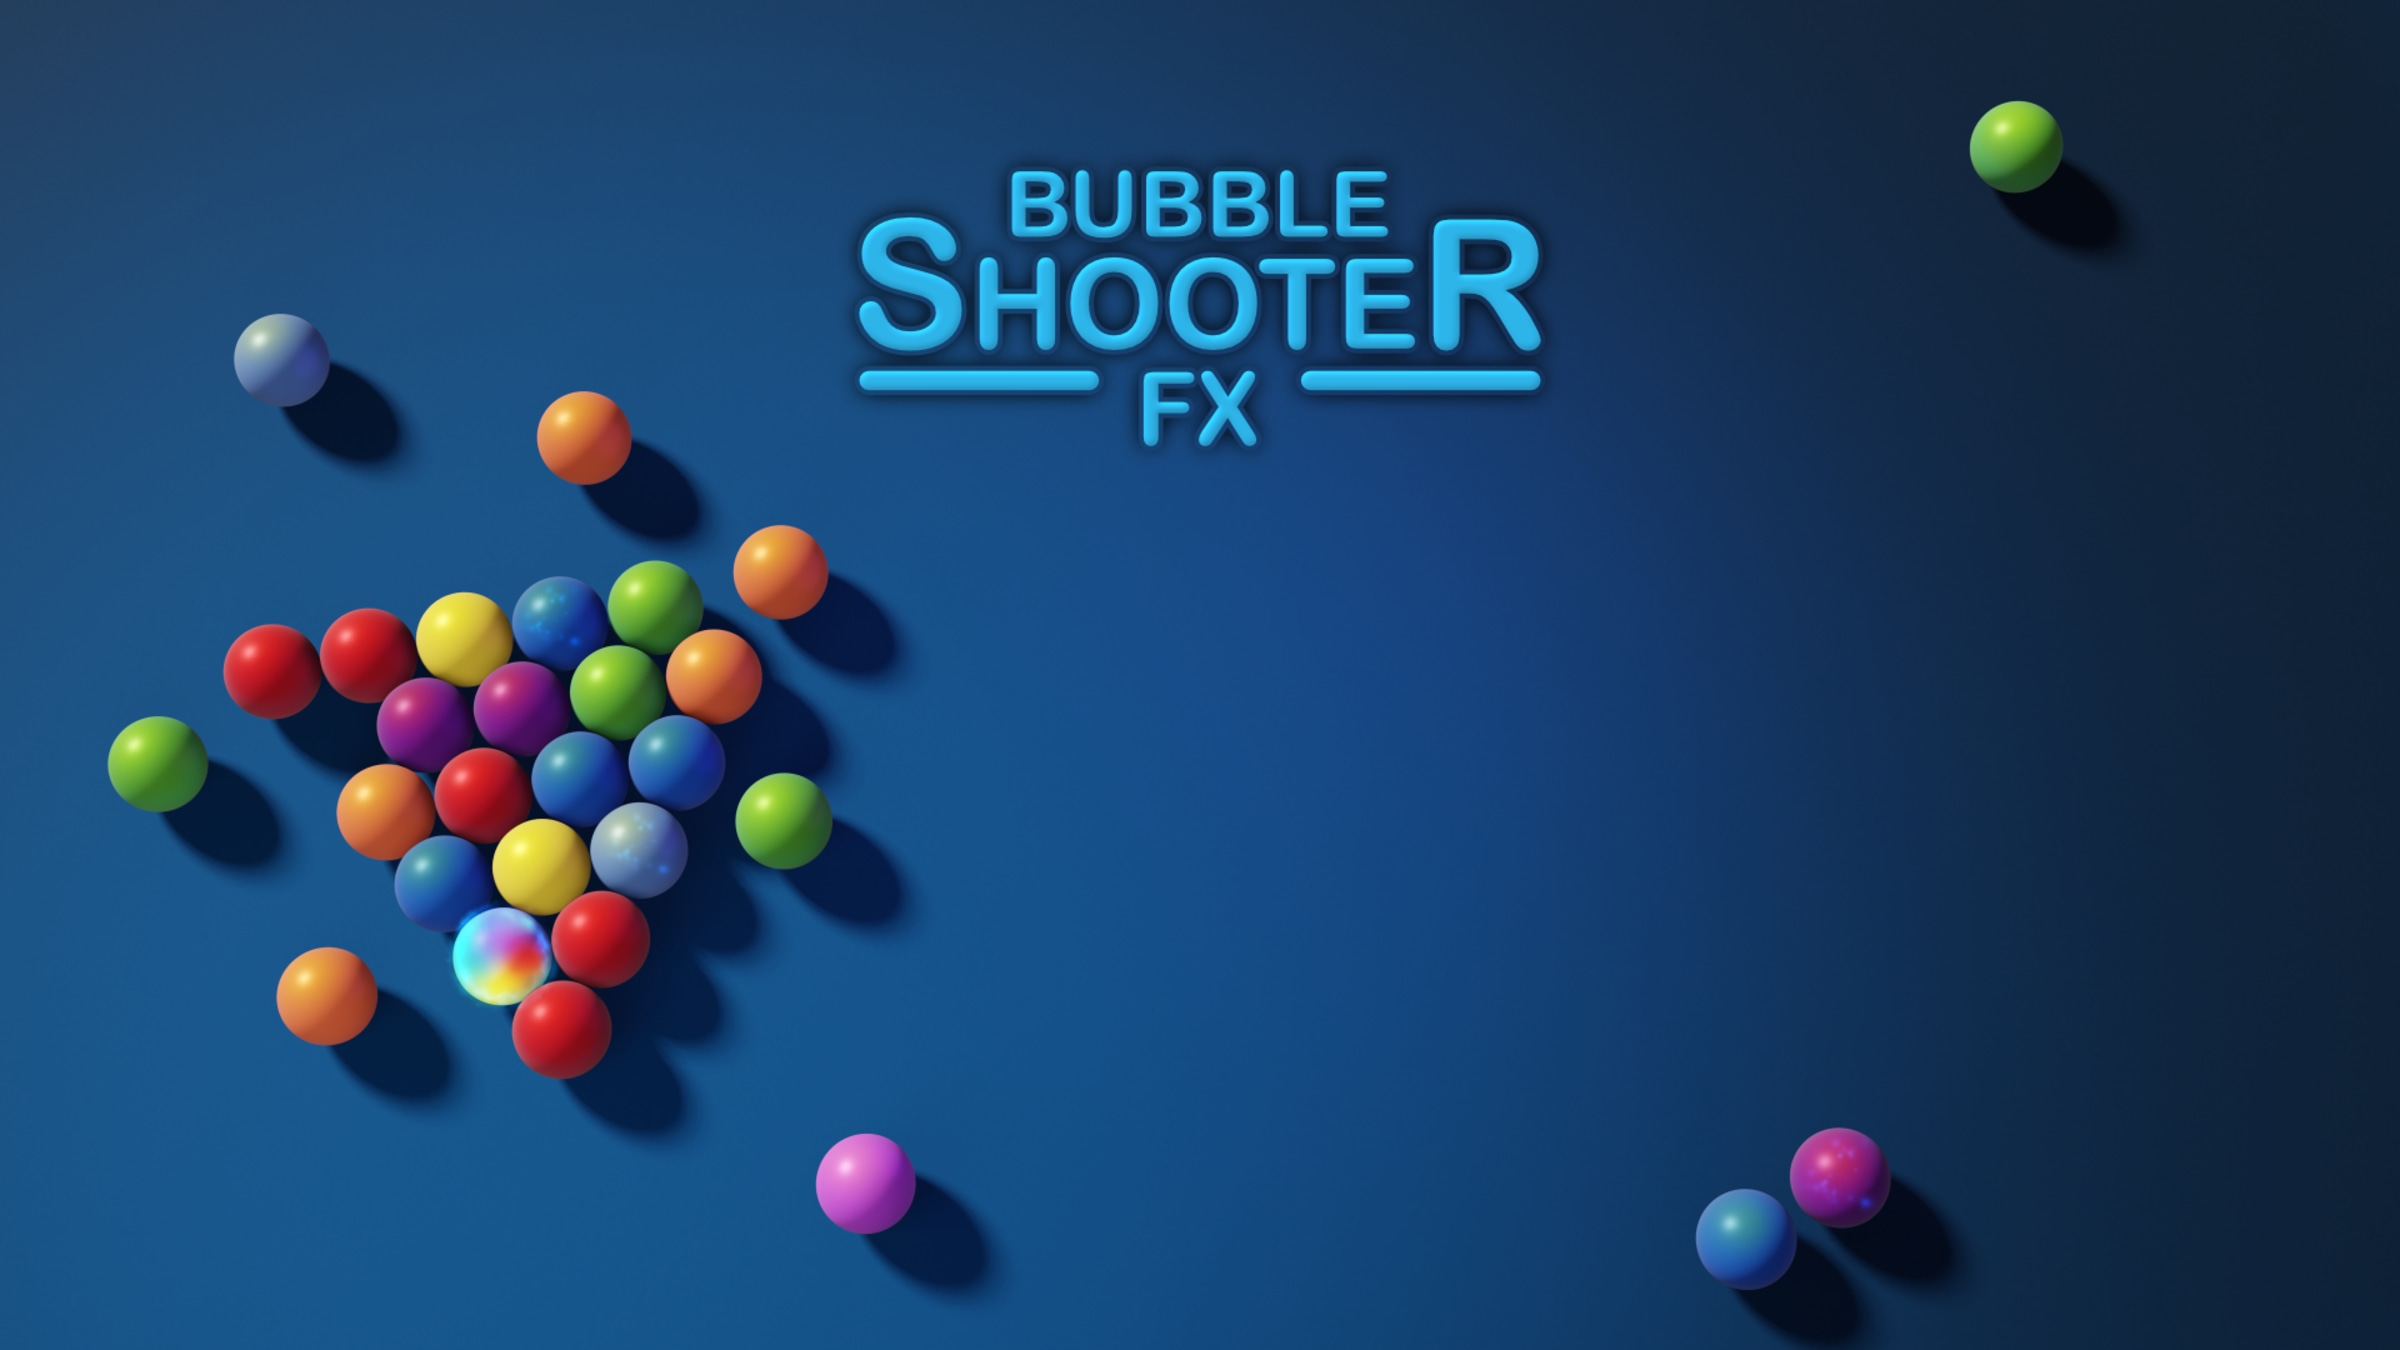 games games bubble shooter